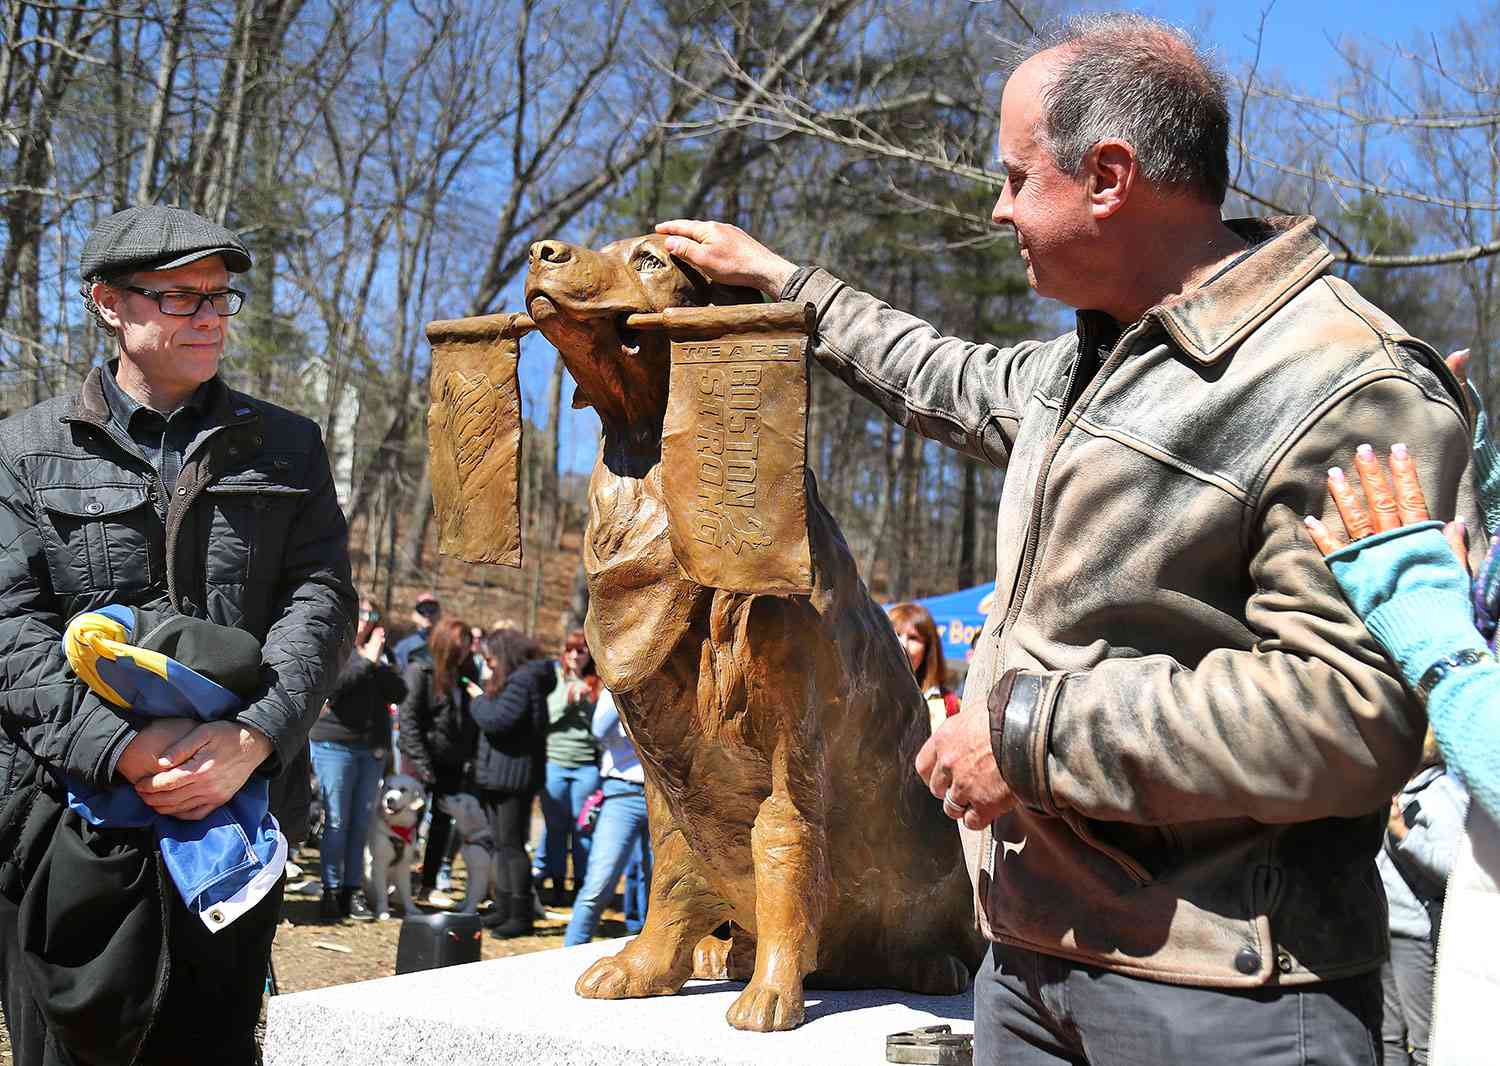 Ashland, MA - March 30: A statue was dedicated to honor Spencer, a Golden Retriever therapy dog who became the official dog of the Boston Marathon. Spencer from Holliston stood on the course in Ashland and held a Boston Strong flag in its mouth. The dog died from cancer on Feb. 17, 2023.